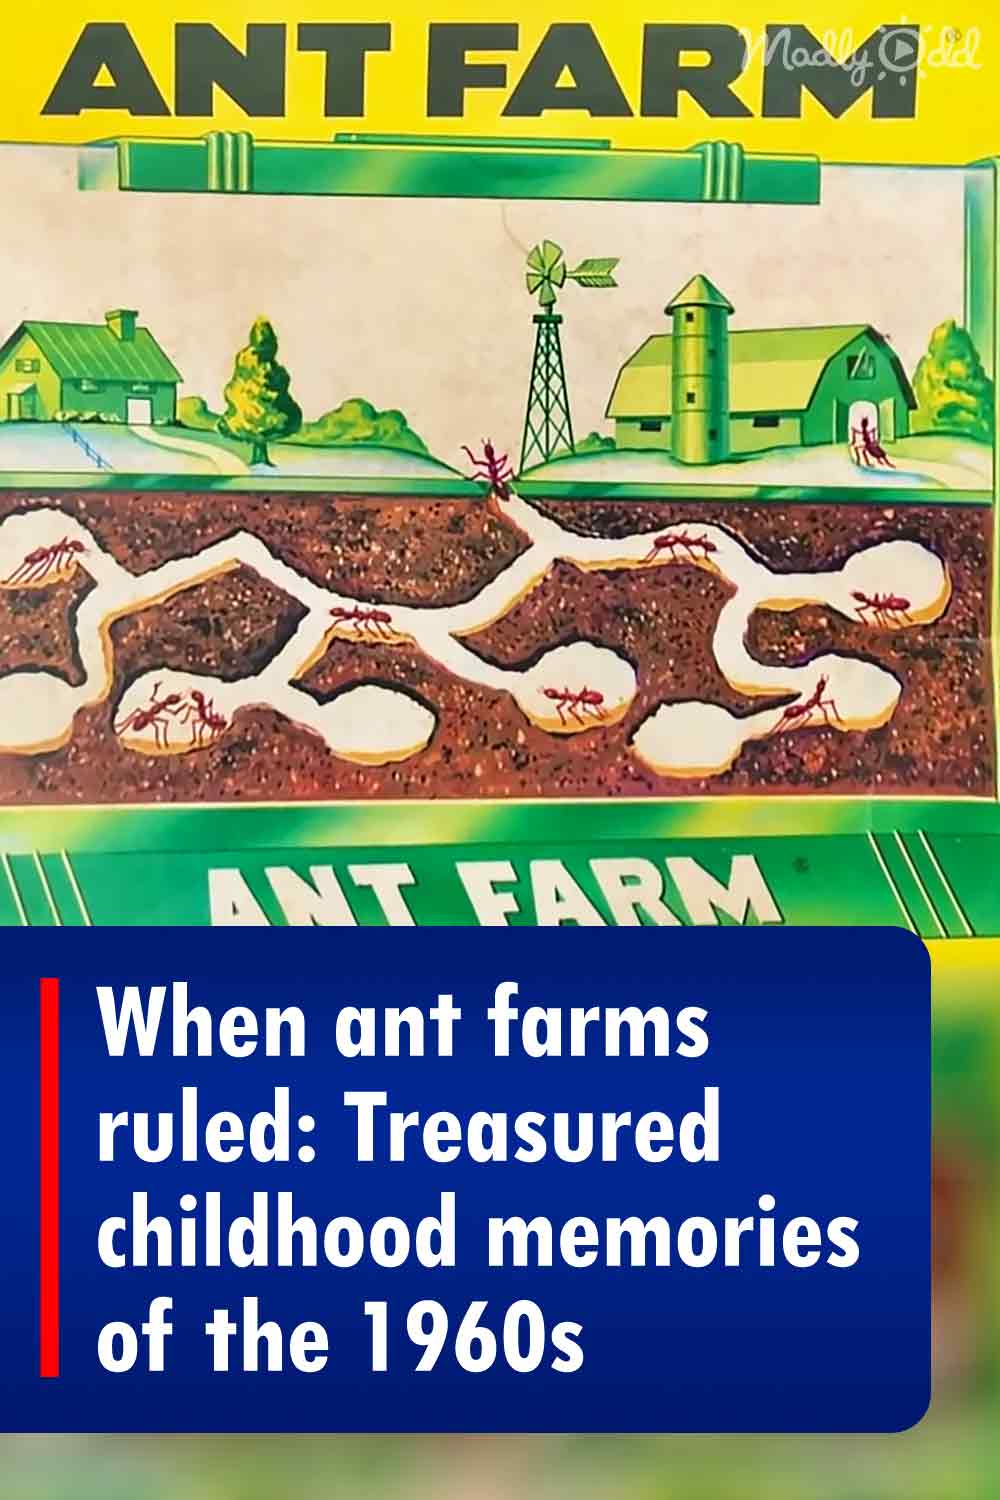 When ant farms ruled: Treasured childhood memories of the 1960s